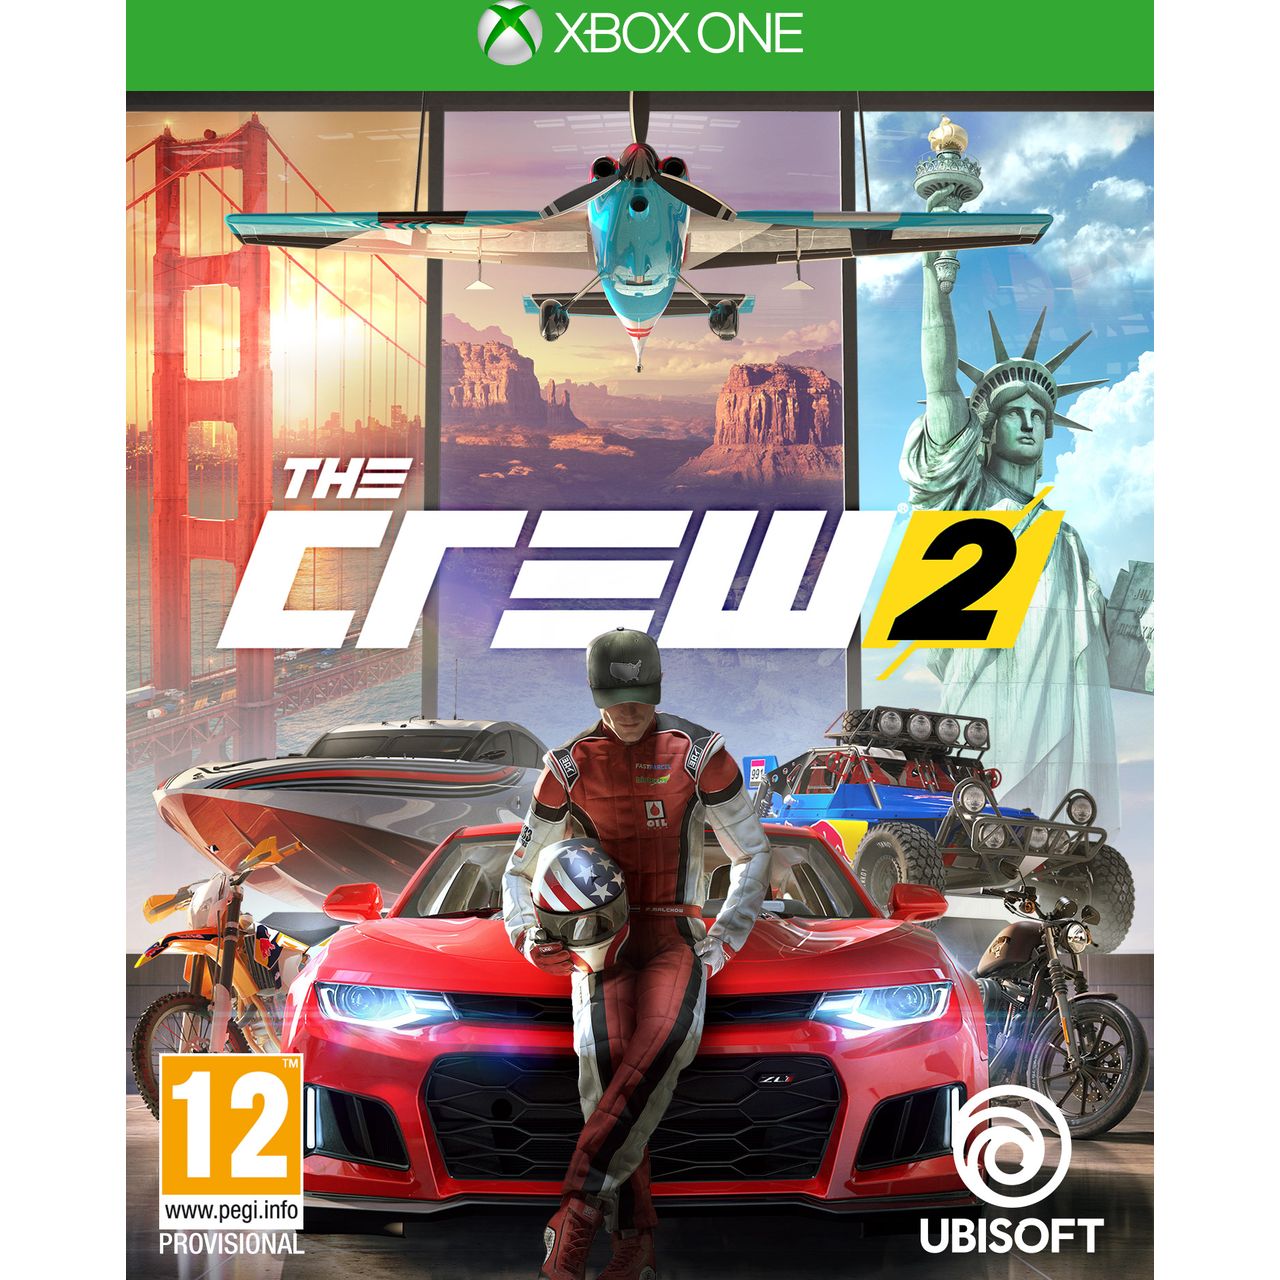 The Crew 2 for Xbox One Review